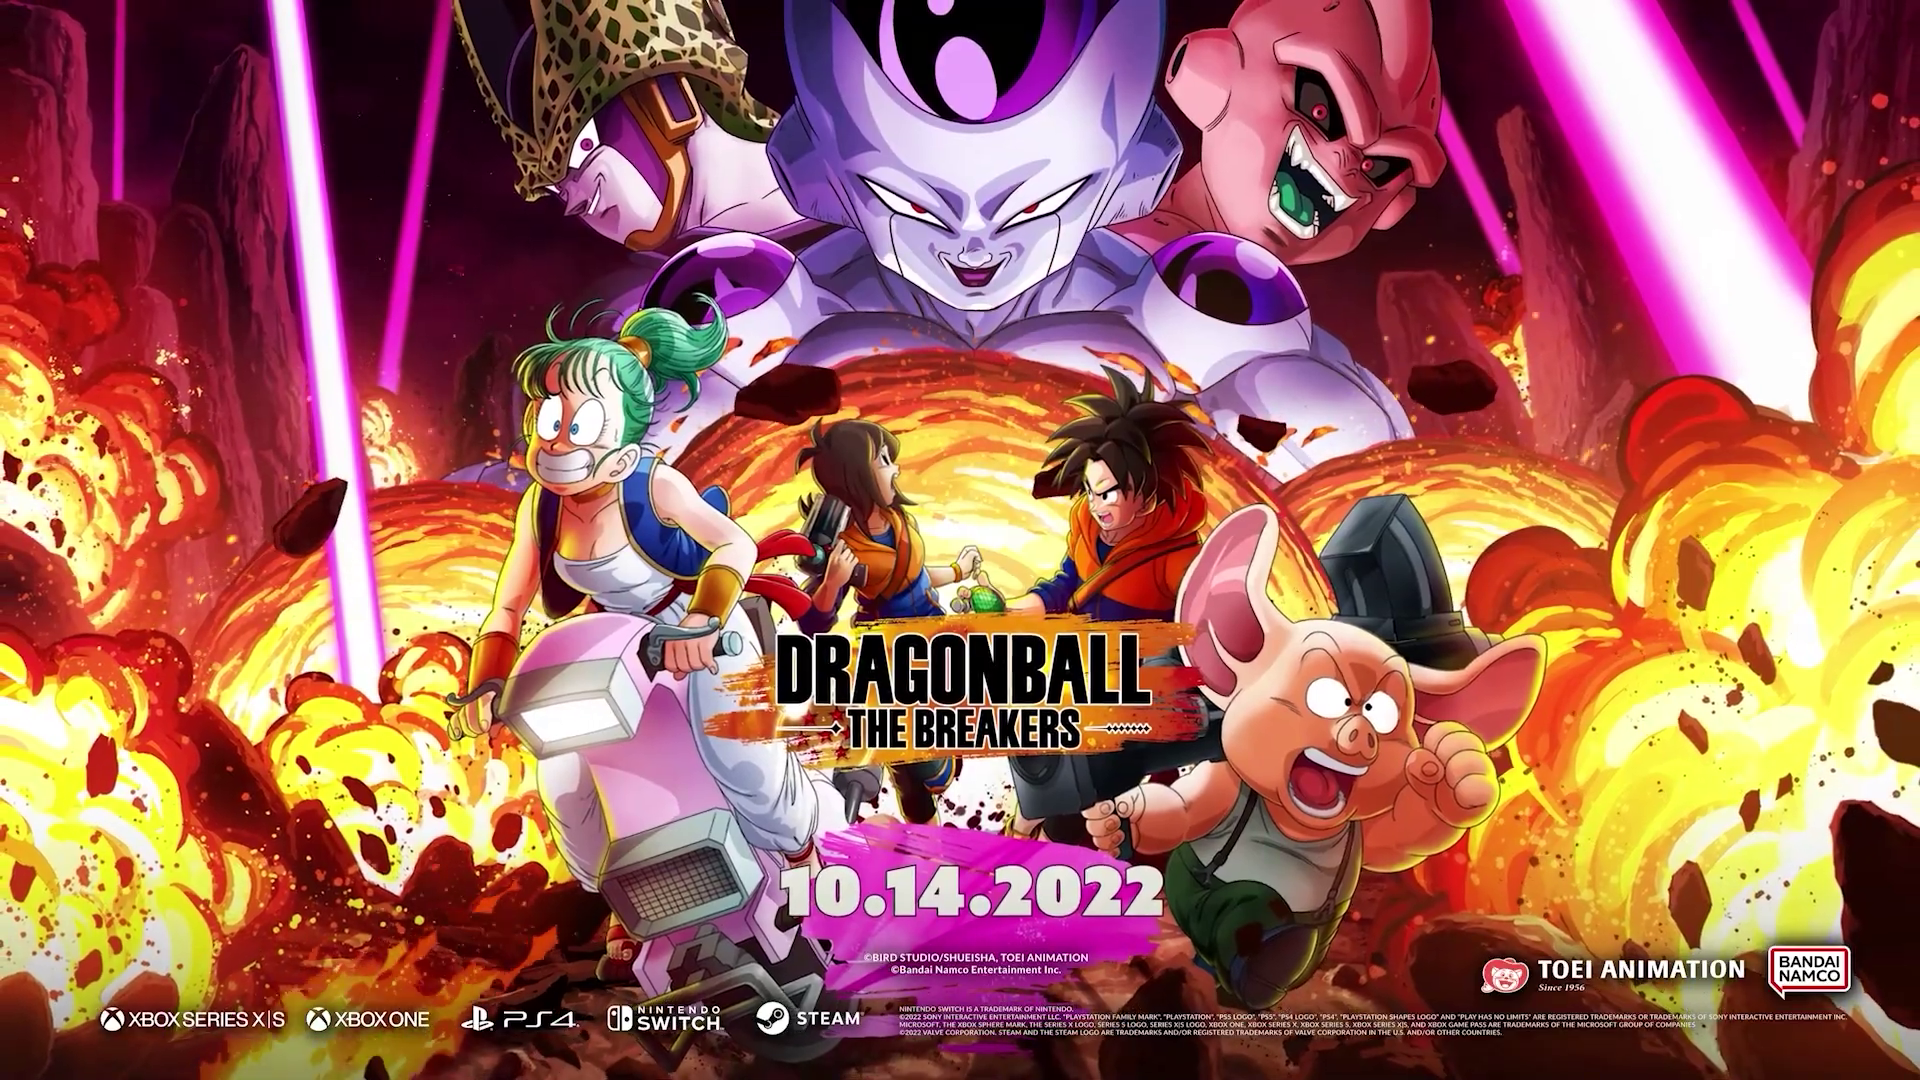 Dragon Ball: The Breakers release date and Special Edition